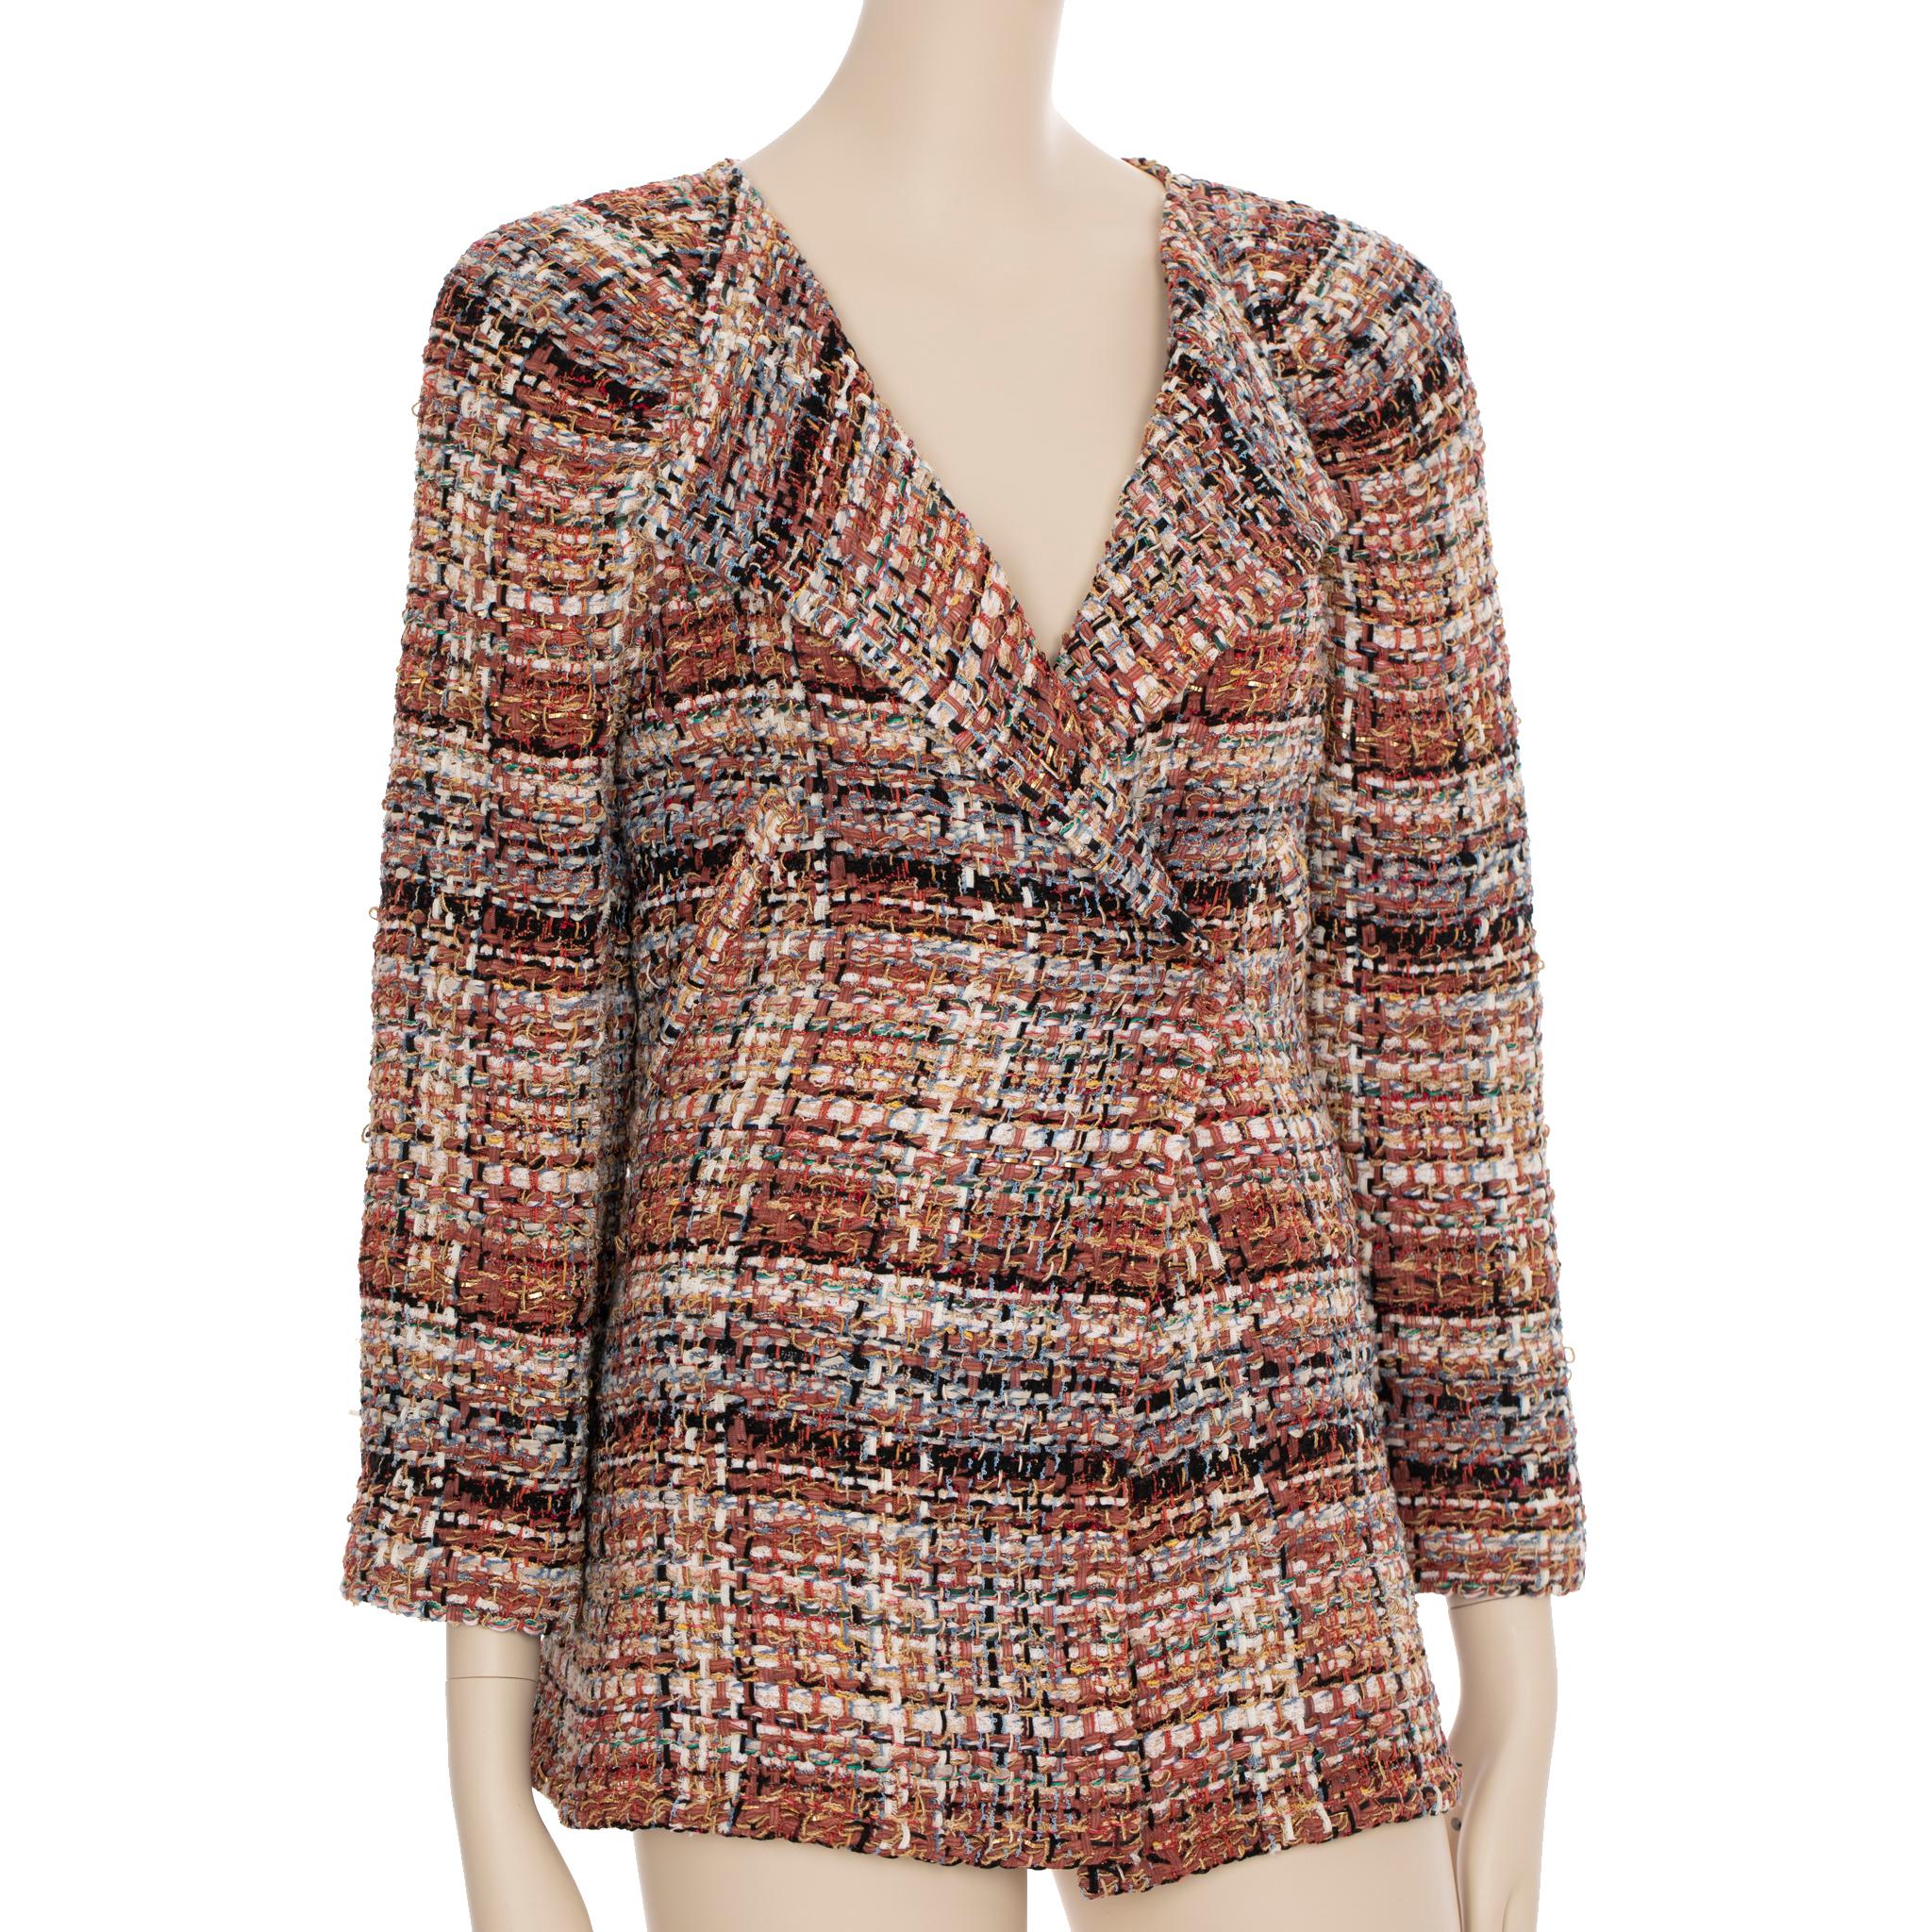 This Chanel multitone fantasy tweed coat with waist belt offers comfortable everyday wear. Its bold tweed pattern stands out for a stylish, casual look. The belt accentuates your figure and adds a touch of extra flair.

Brand: Chanel

Product: